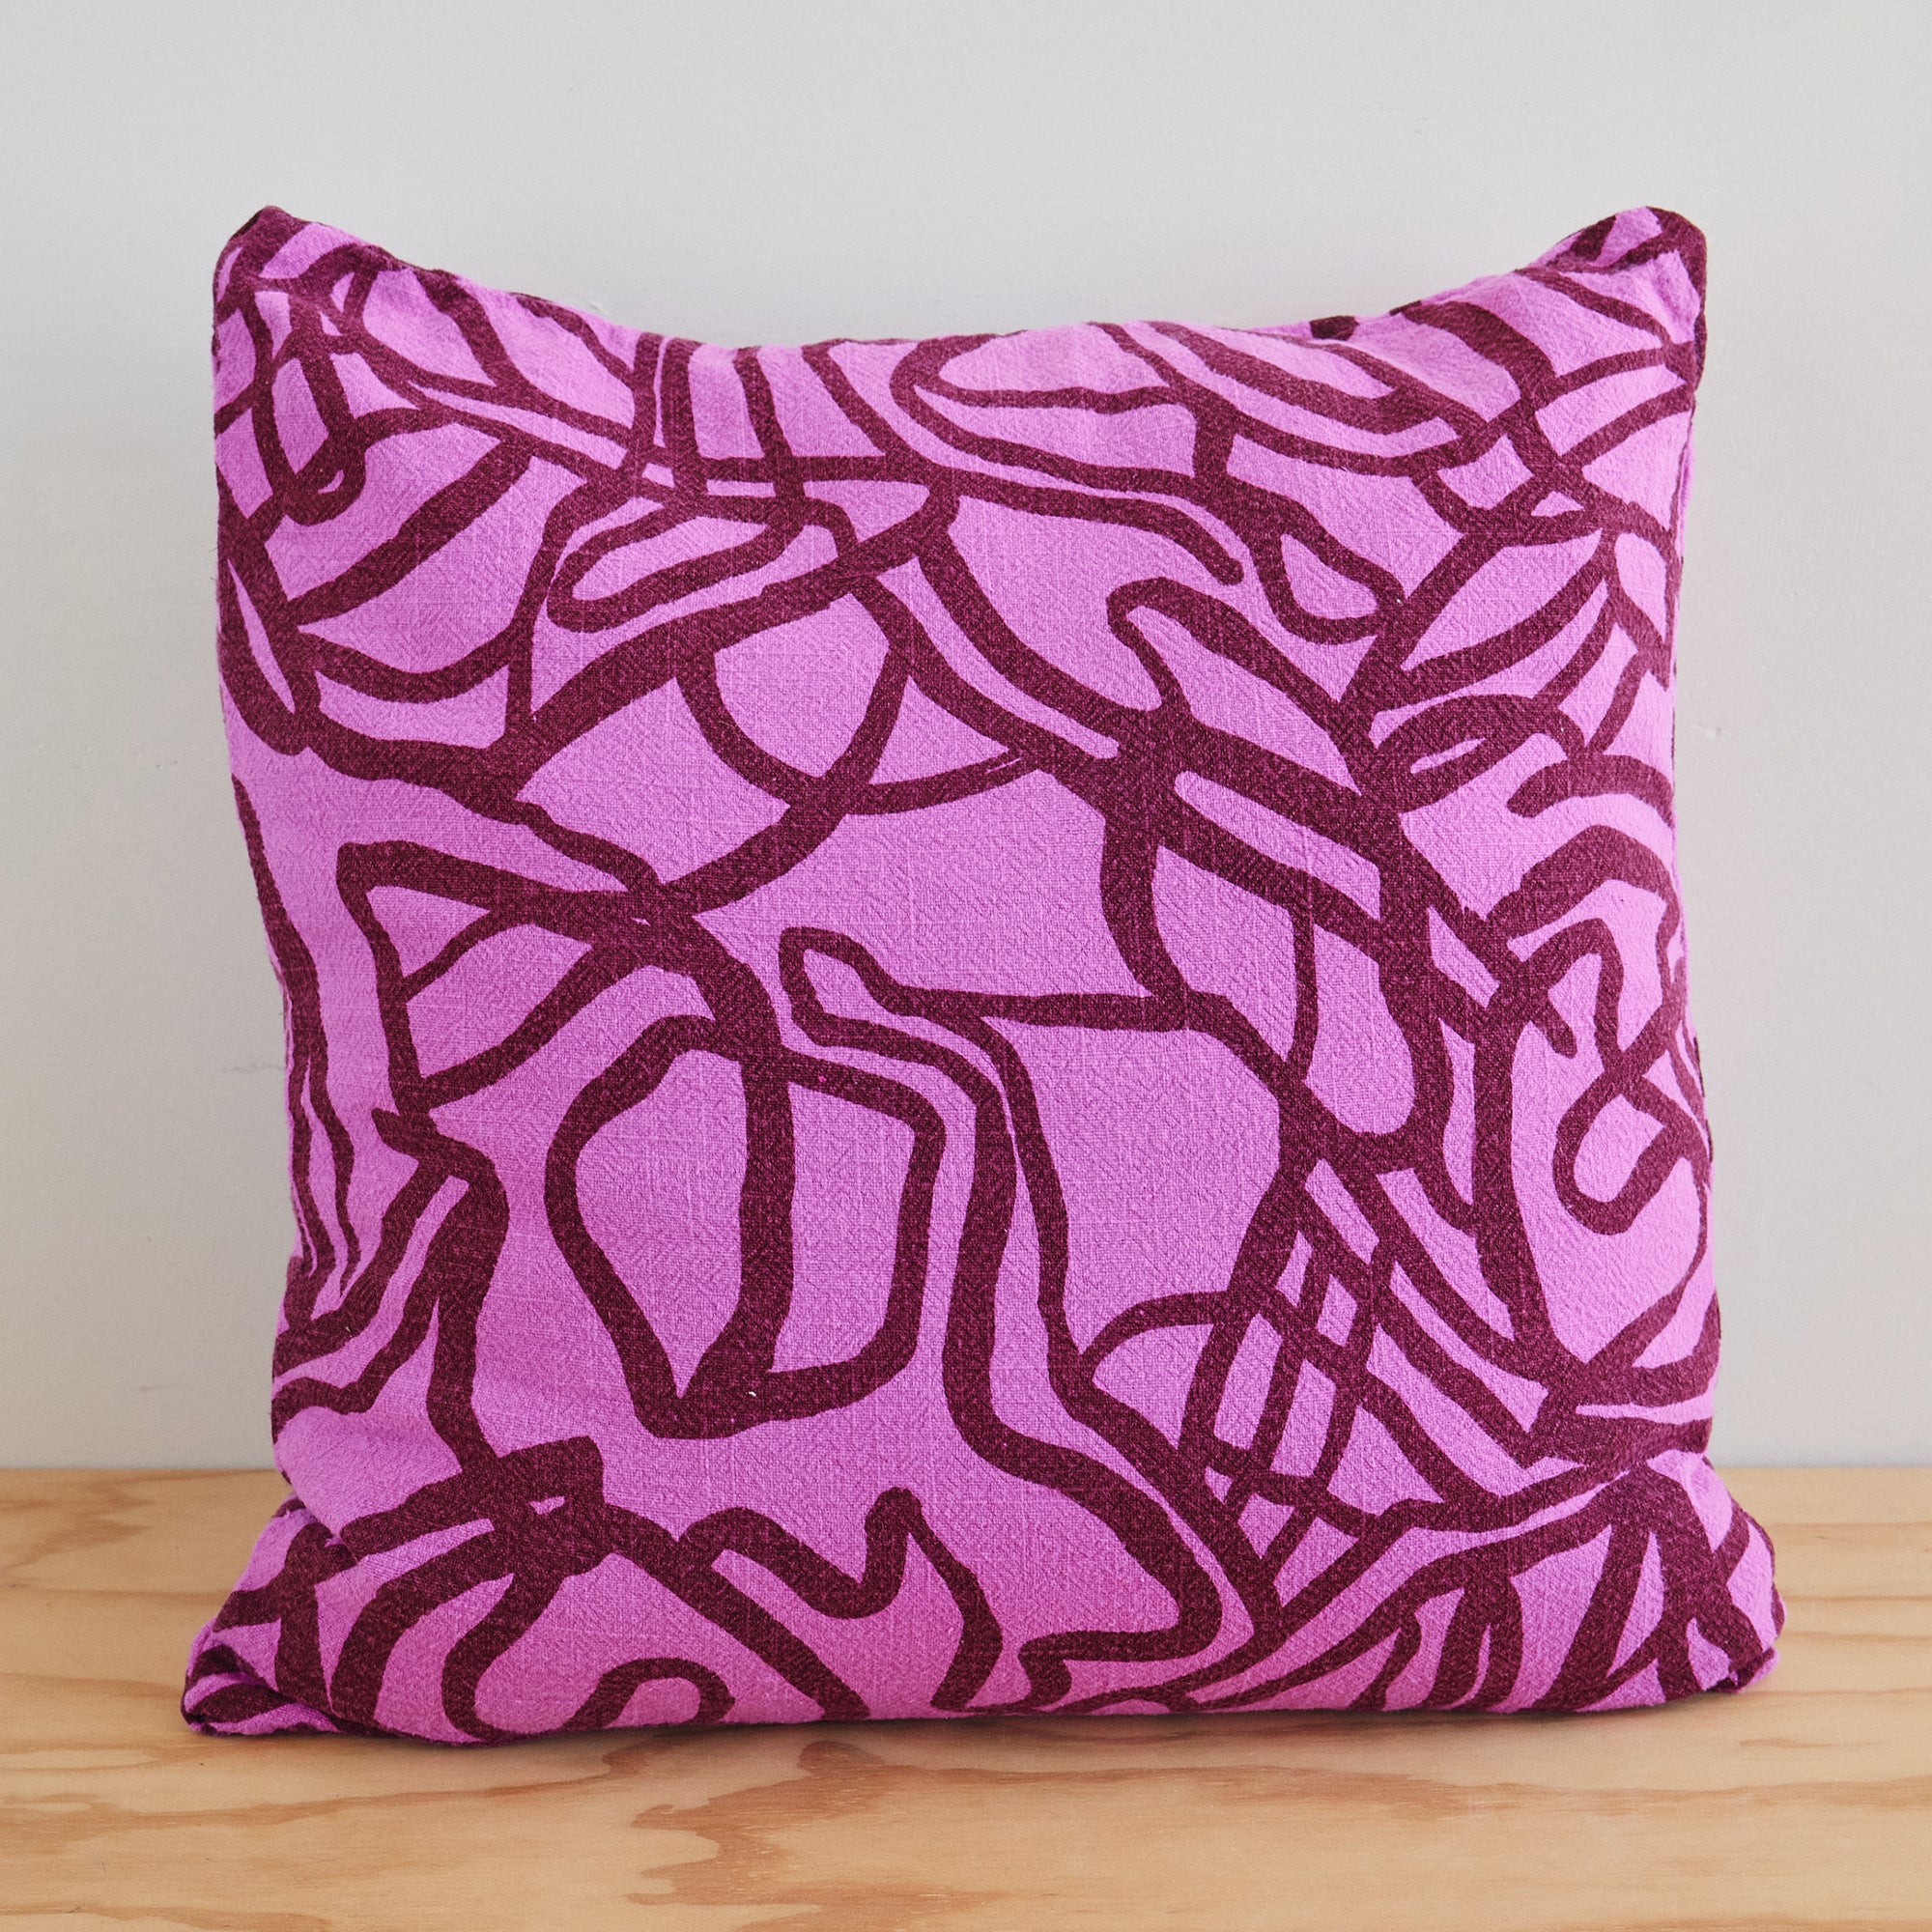 The Square Throw Pillow - River in Maroon and Fuchsia